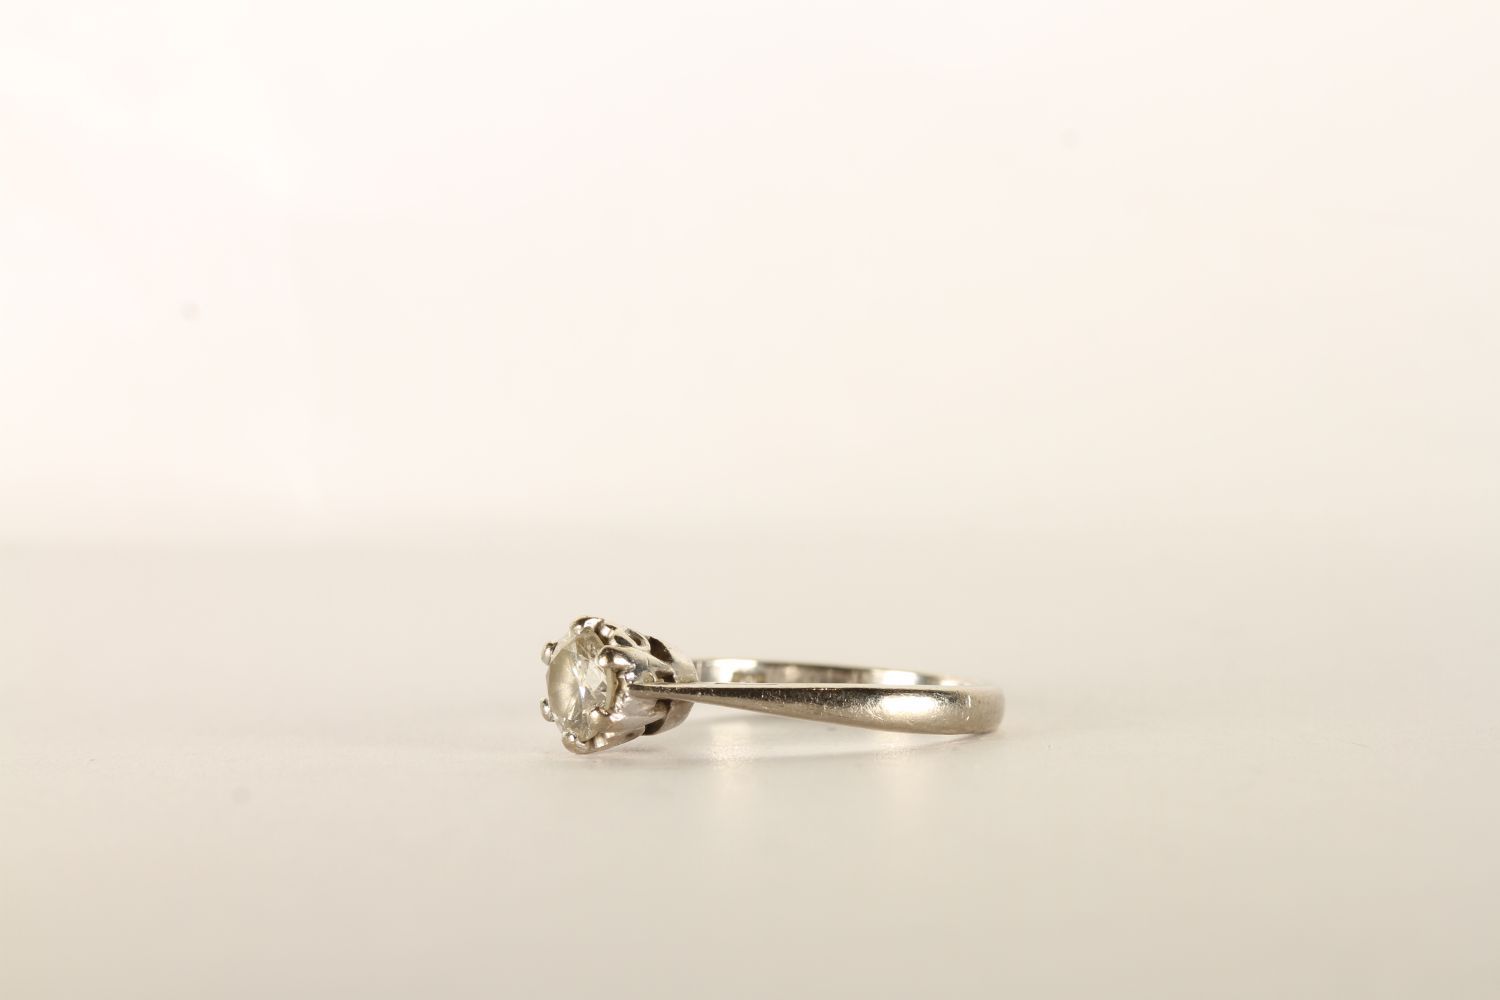 Diamond Solitaire Ring, set with a single round brilliant cut diamond, 6 claw set, stamped 18ct - Image 2 of 2